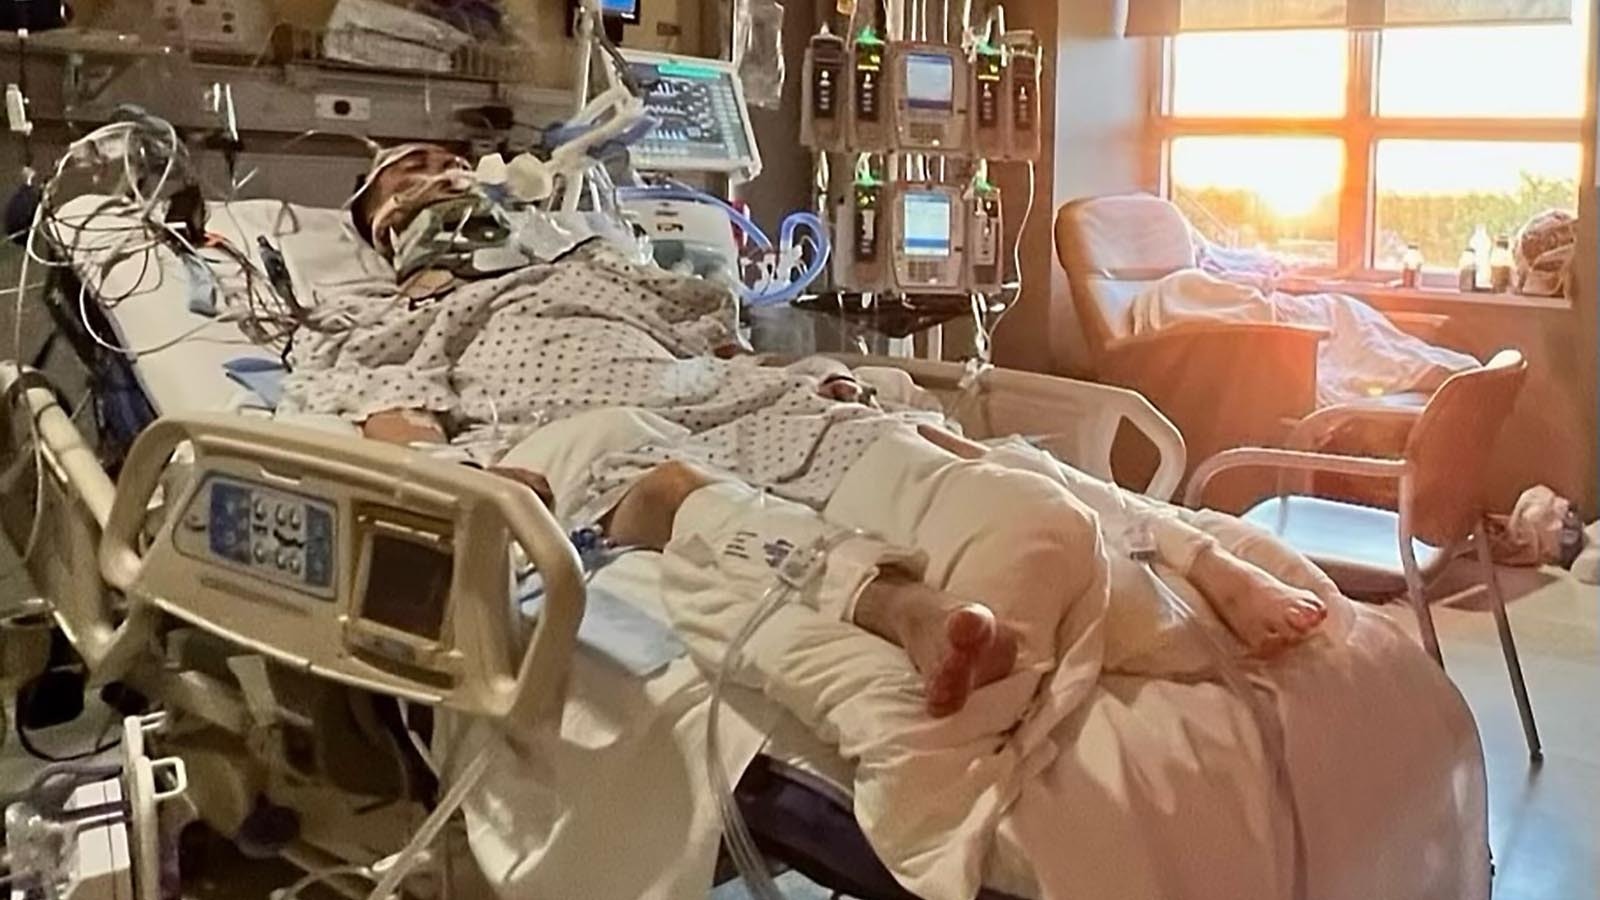 A crash last May left Gavan Bethel in a coma in ICUs in Casper and then Englewood, Colorado for nearly 10 days. He was originally given a 3% chance to live.